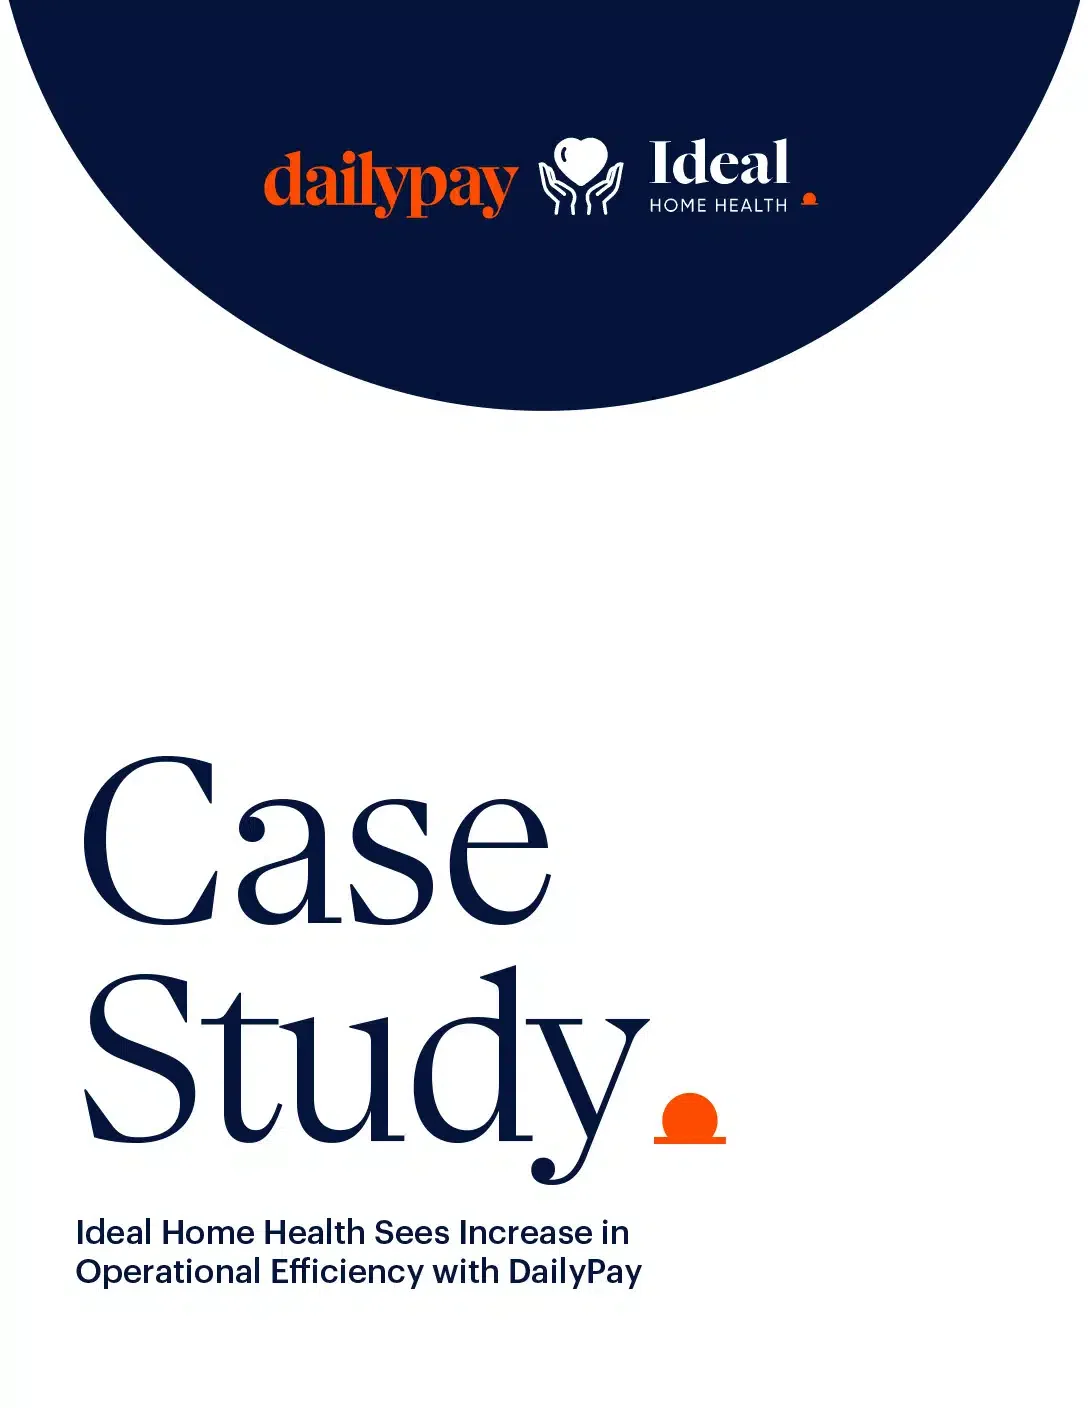 Cover page of a case study with DailyPay and Ideal Home Health logos, titled "Case Study: Ideal Home Health Sees Increase in Operational Efficiency with DailyPay.